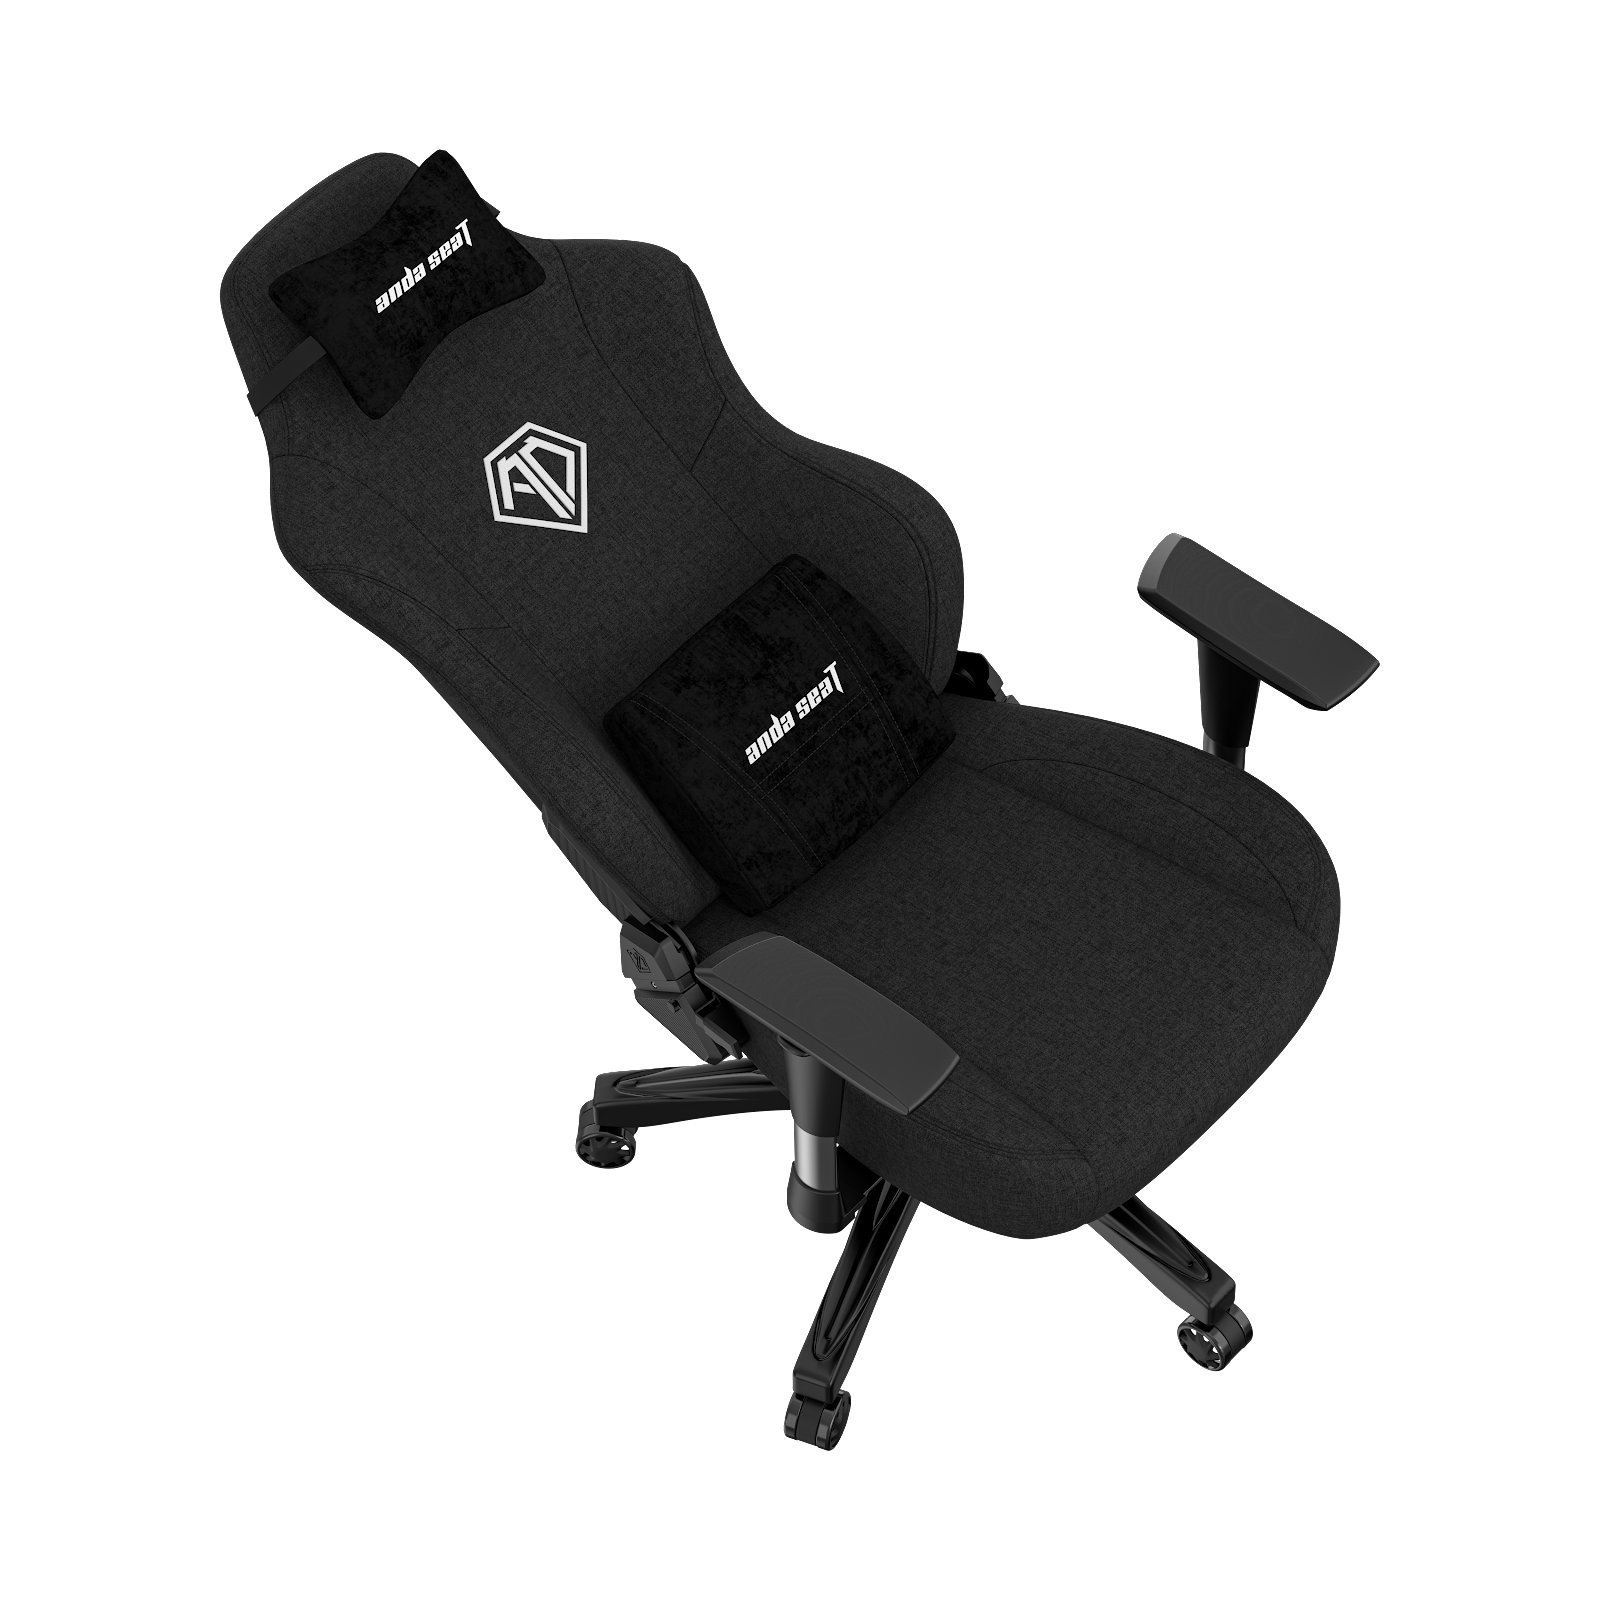 Dowinx Gaming Chair Fabric with Adjustable Thicken Cushion